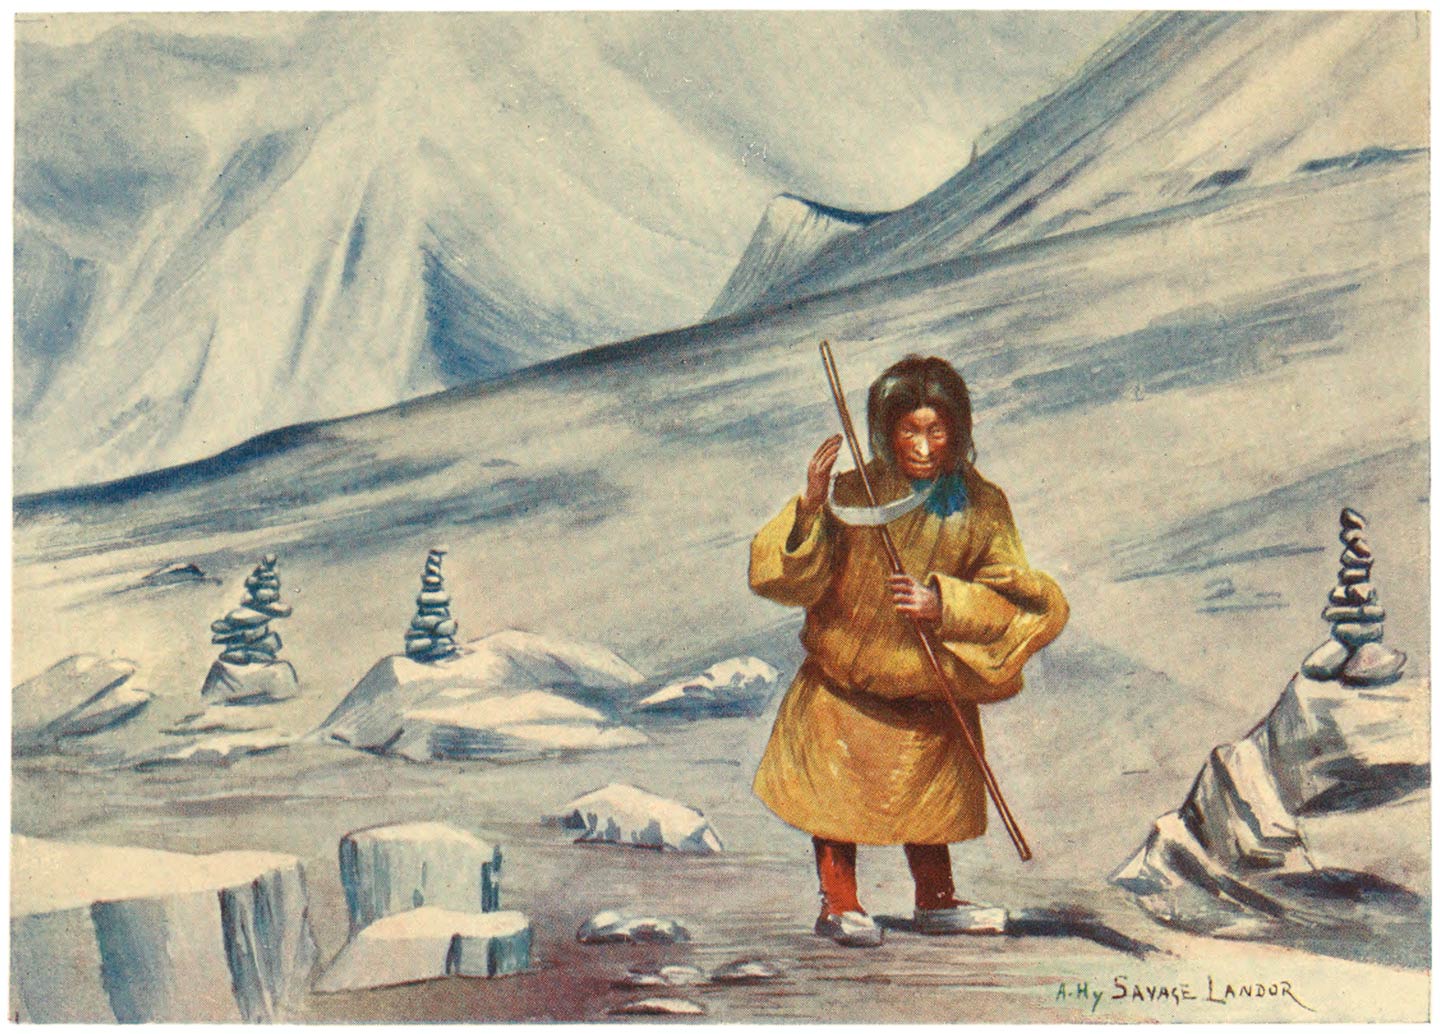 A Tibetan Spy in the Disguise of a Beggar approaching the Author’s Camp